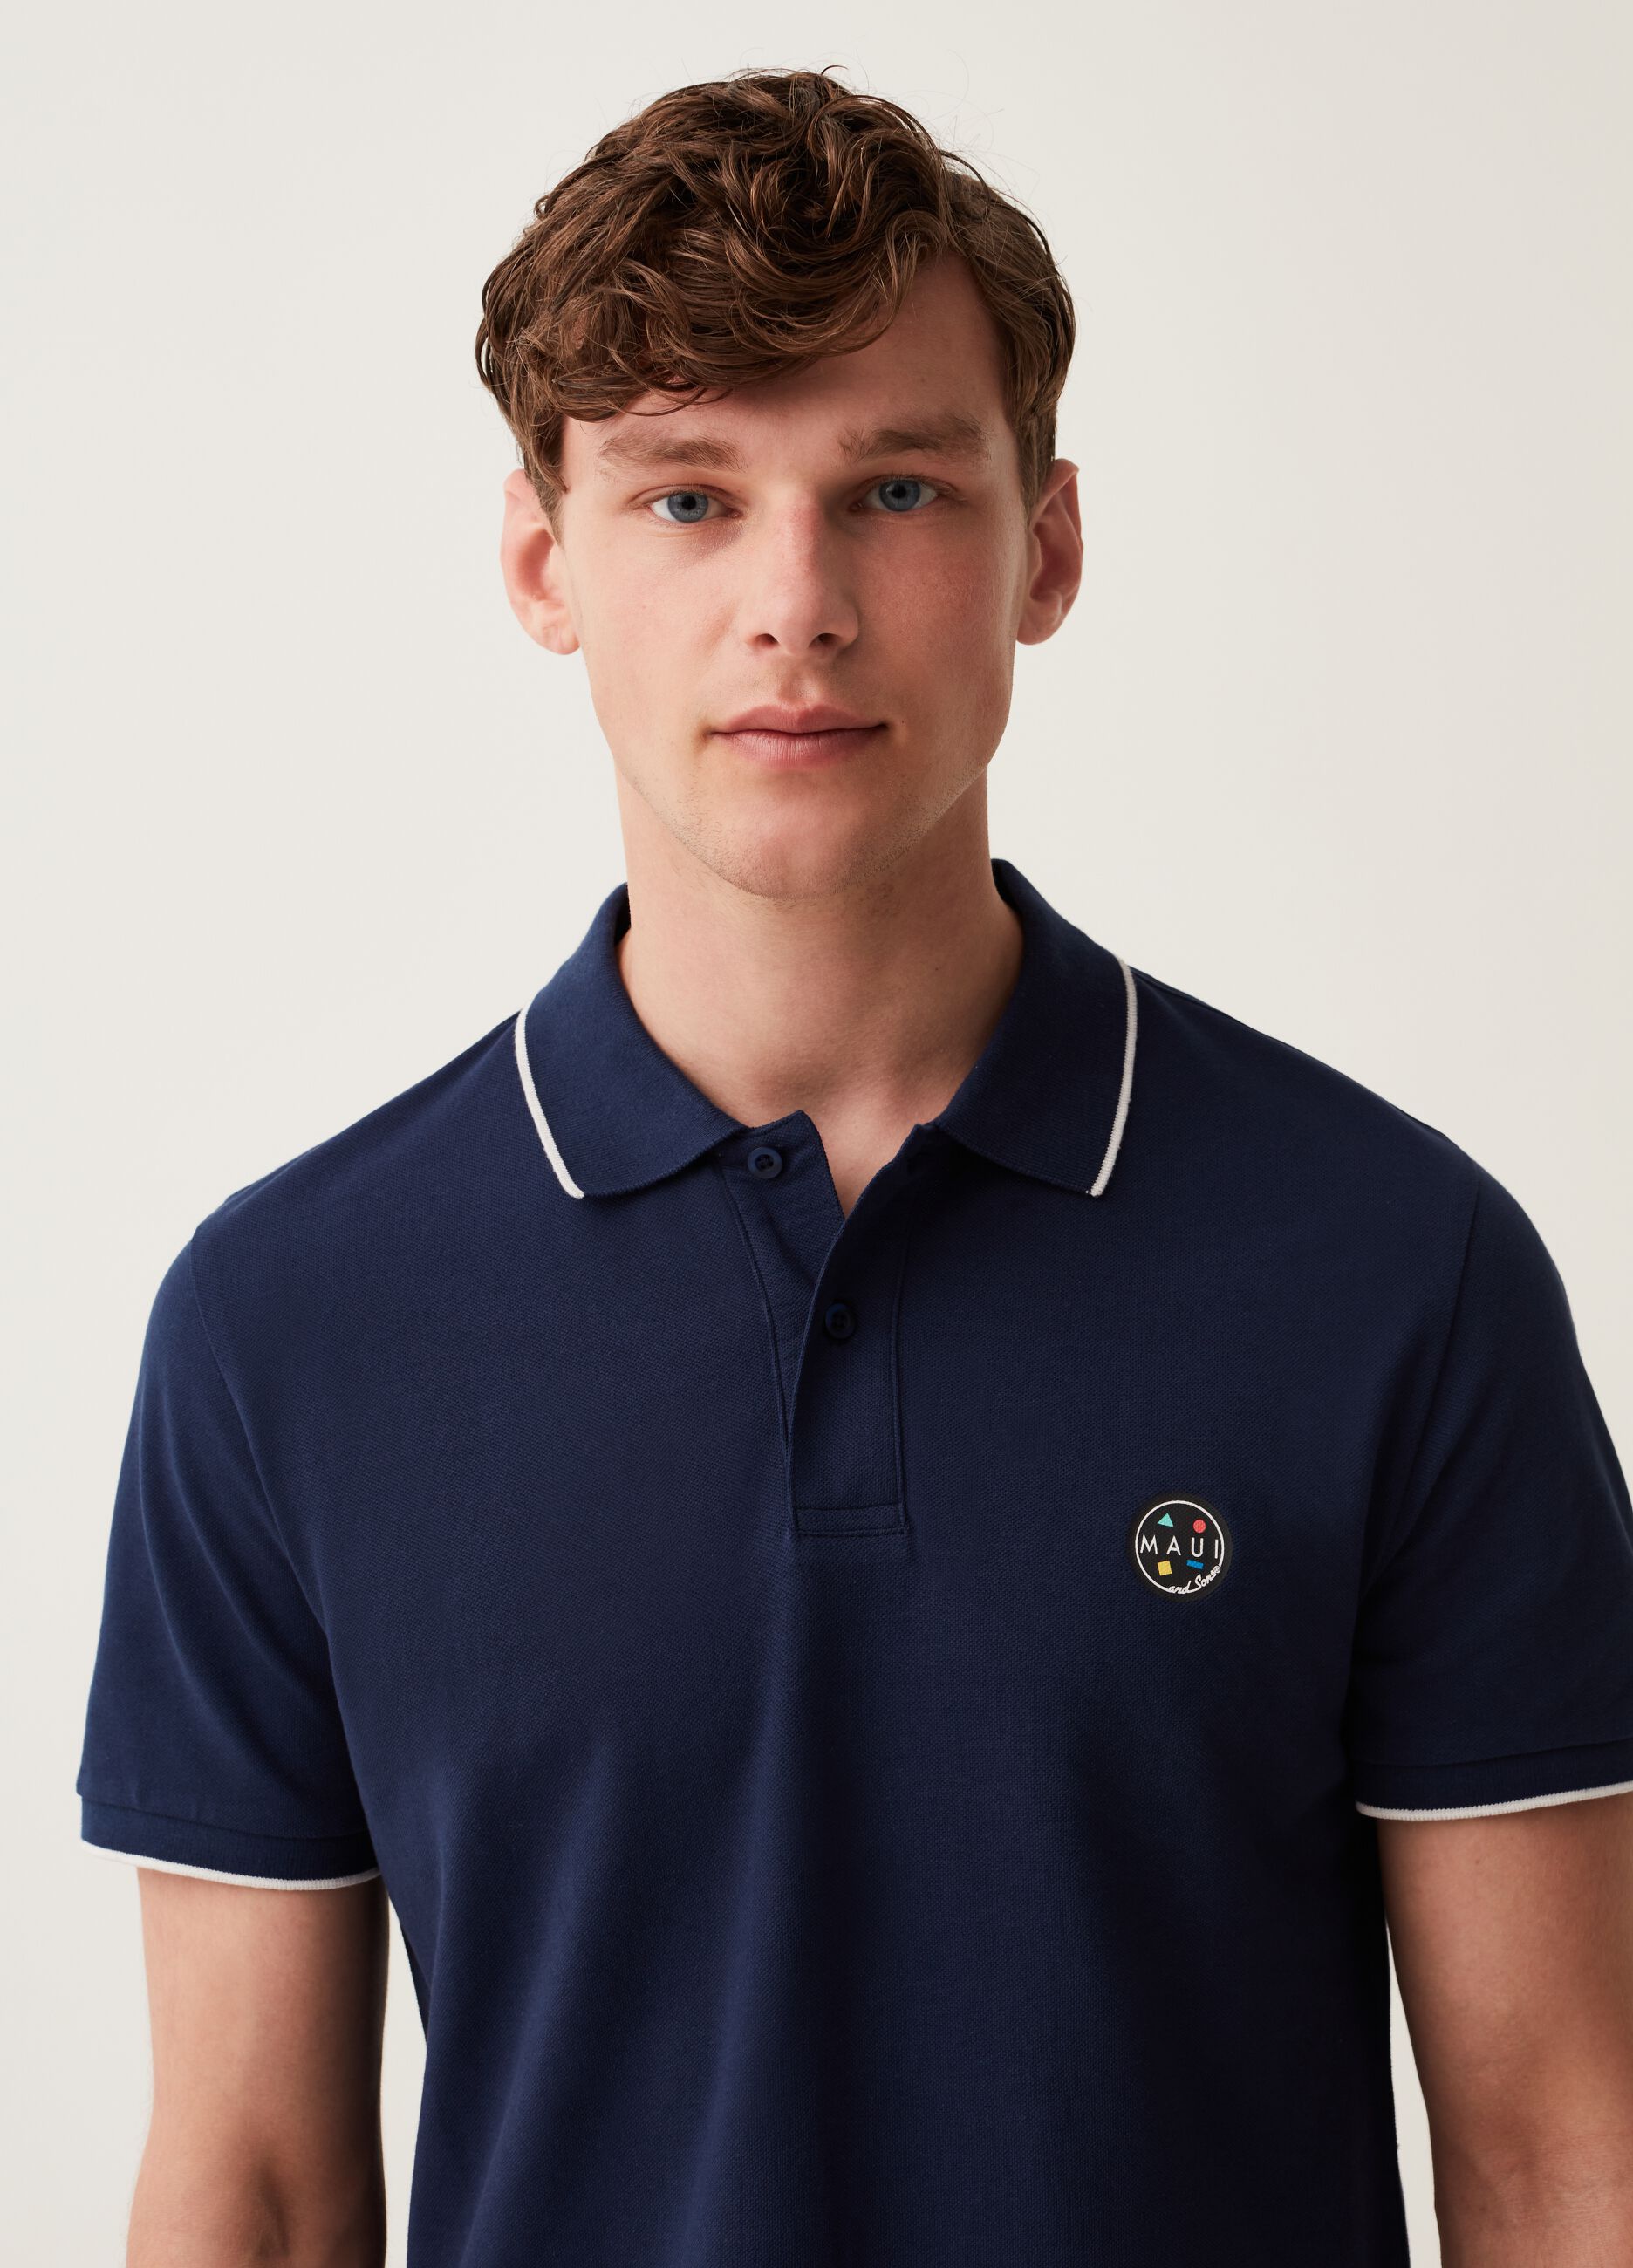 Piquet polo shirt with Maui and Sons print